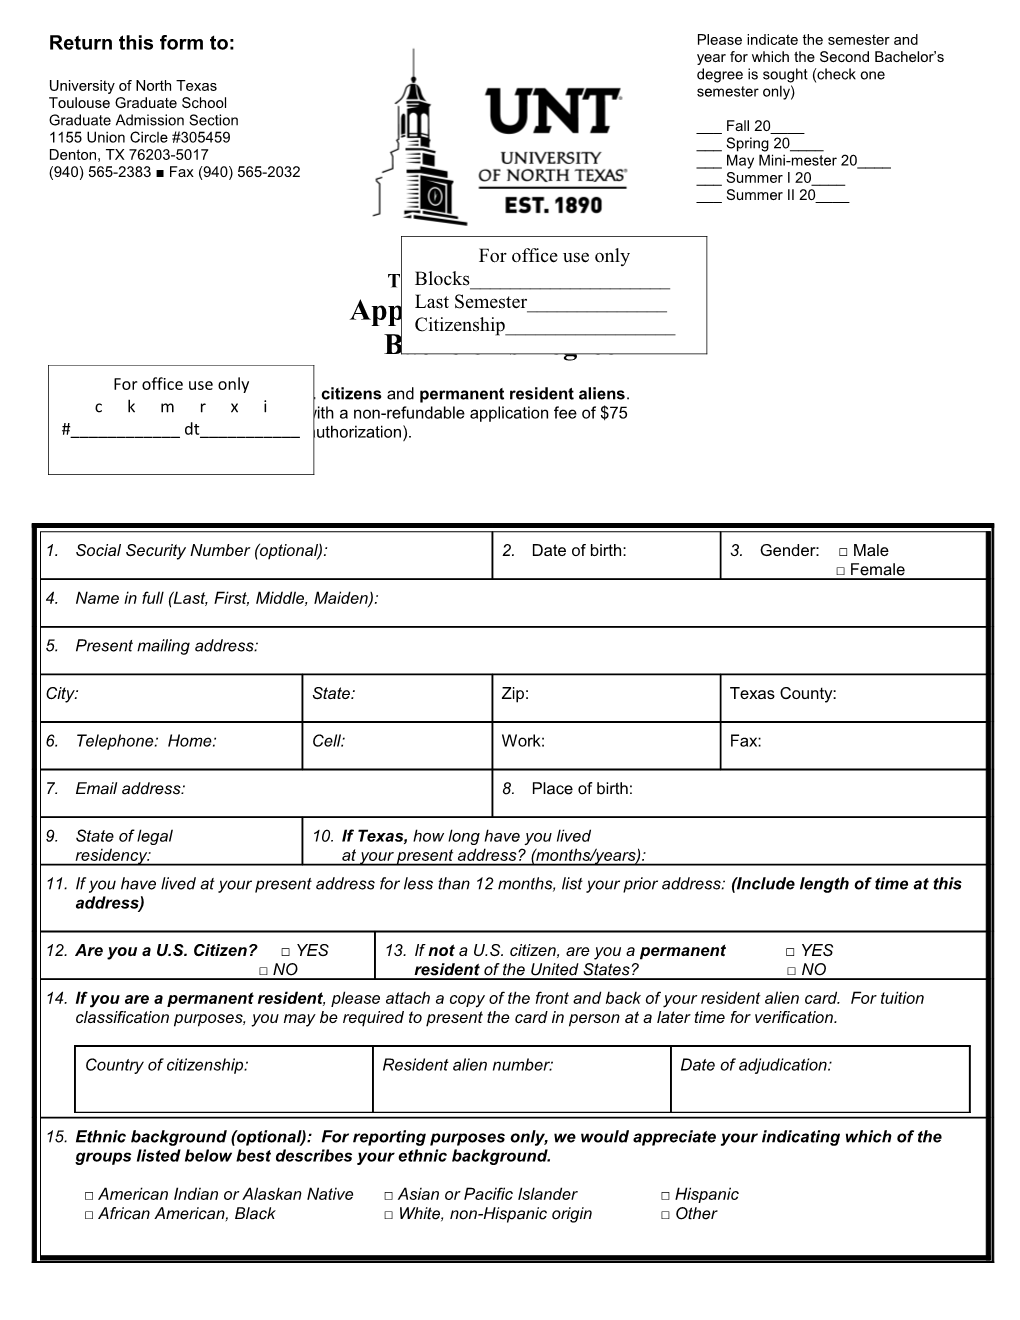 Return This Form To